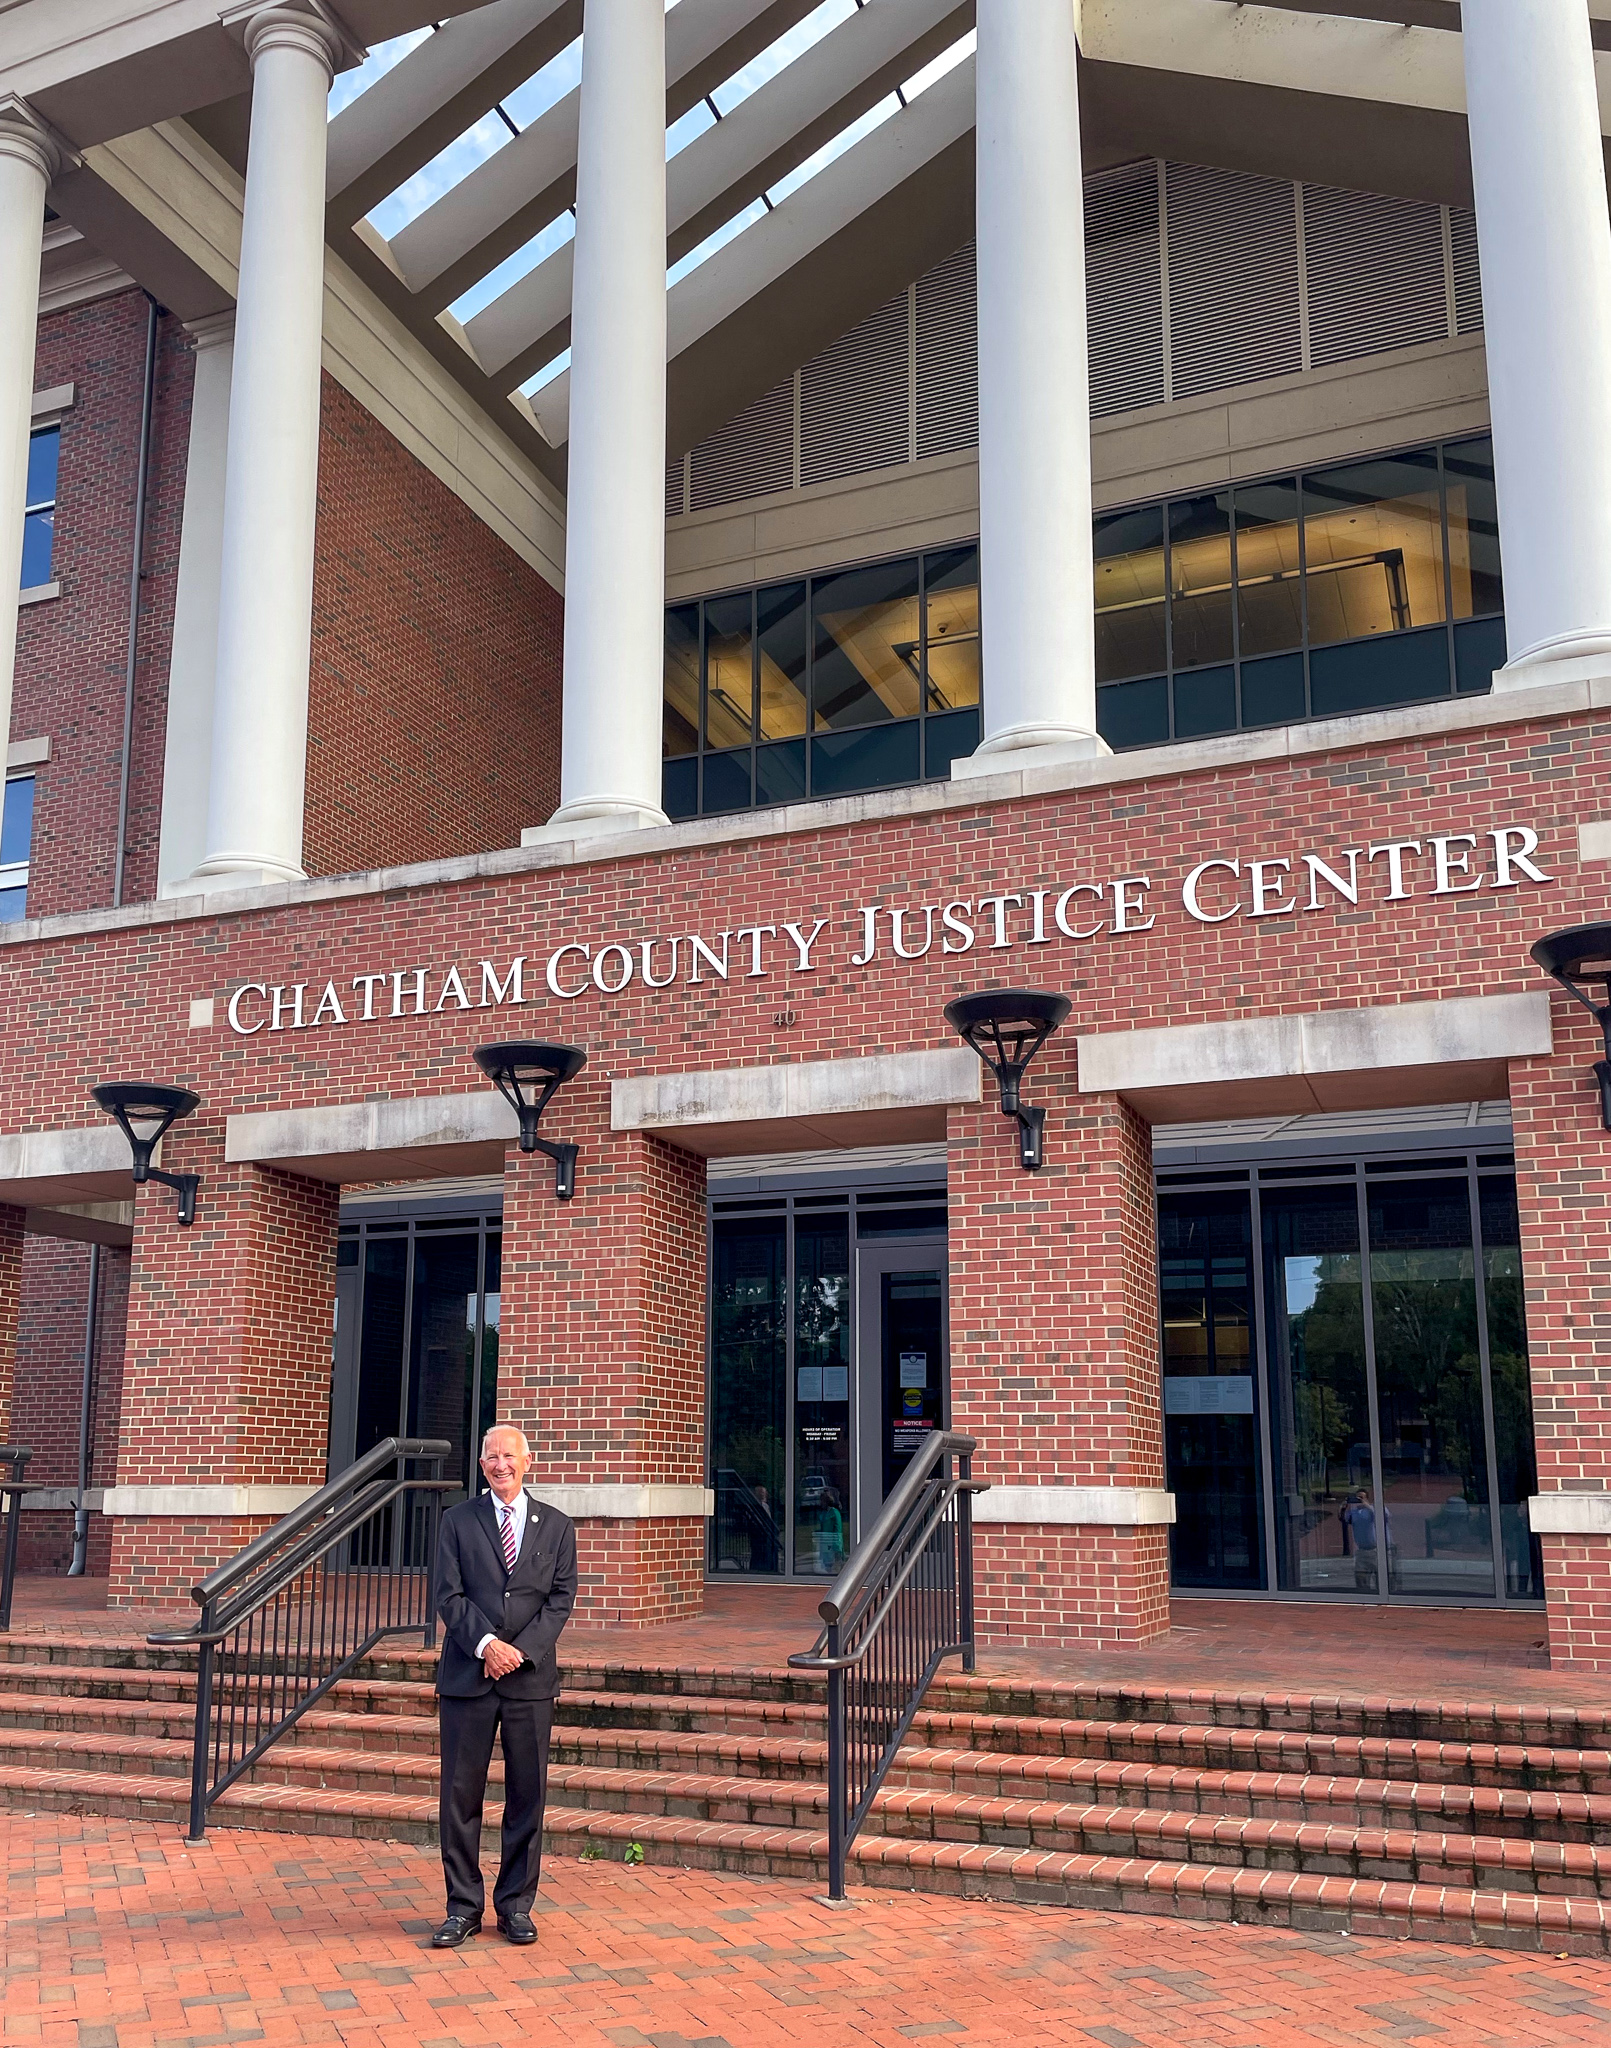 Chief Justice Newby outside of the Chatham County Justice Center